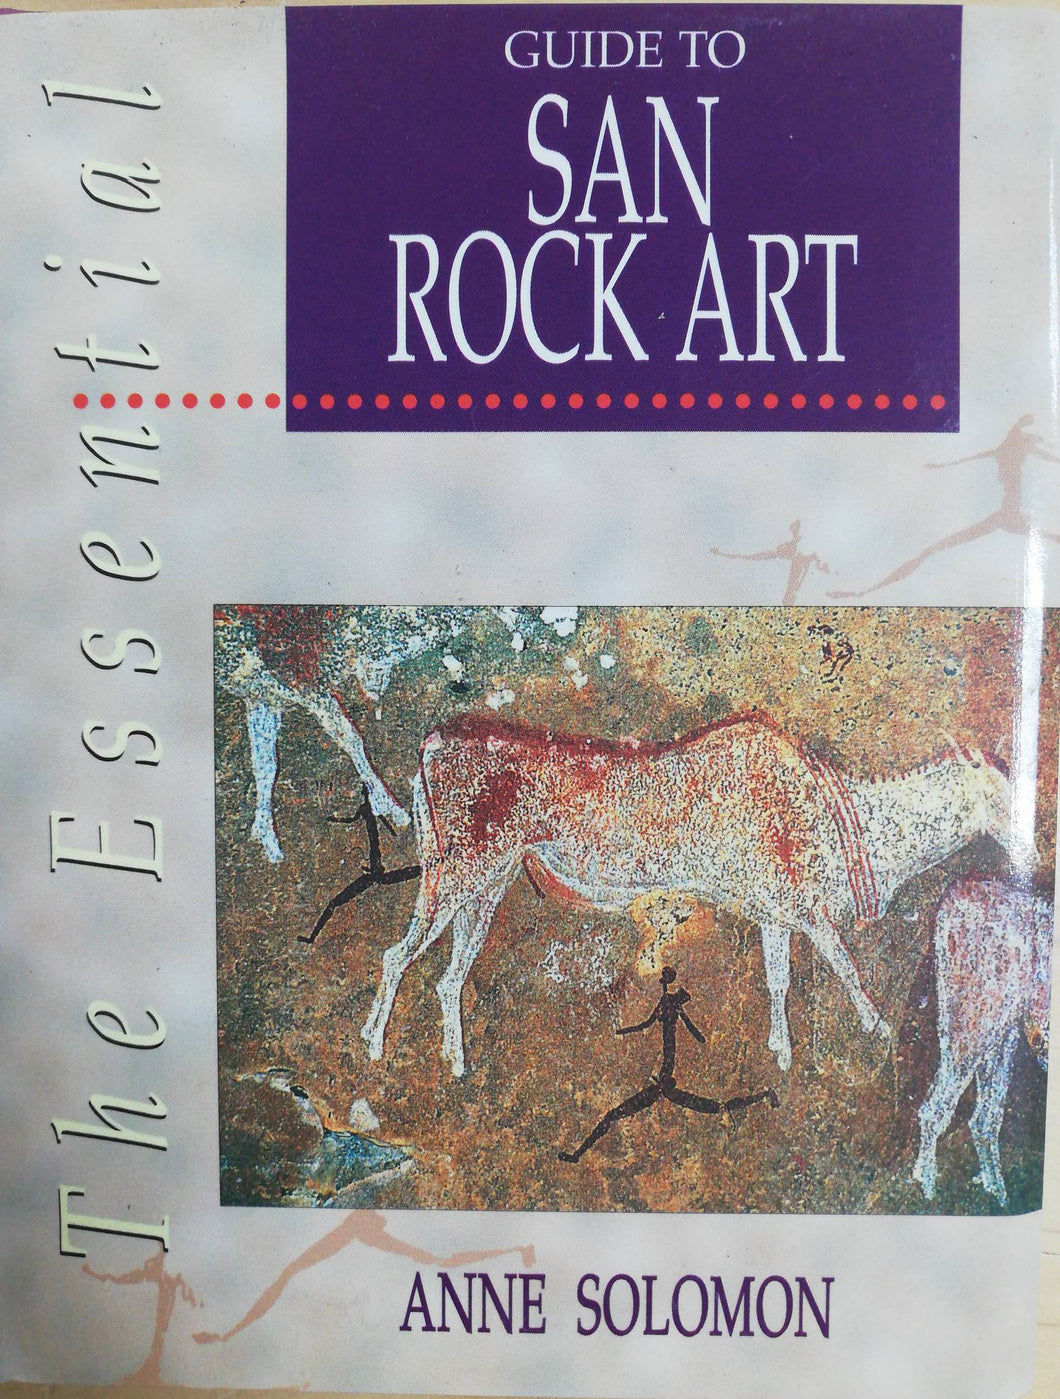 ESSENTIAL GUIDE TO SAN ROCK ART